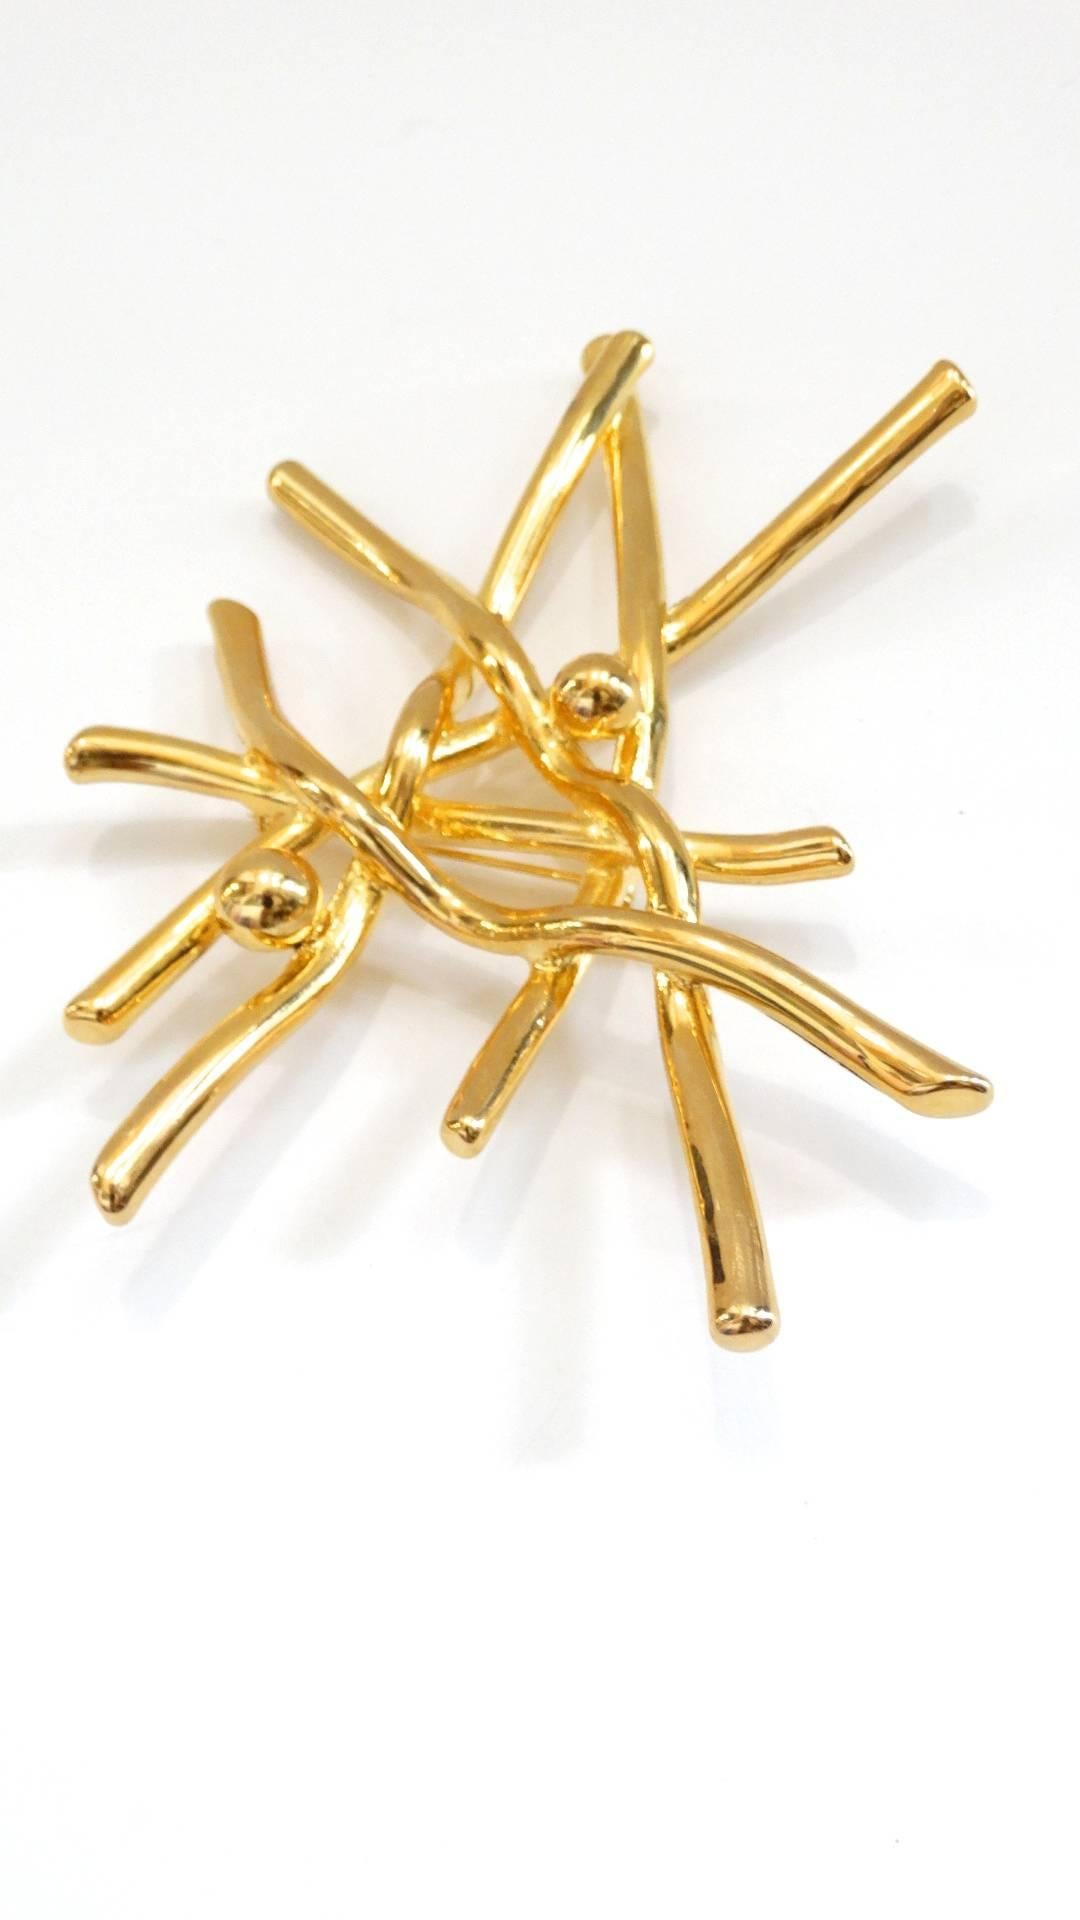 Show your appreciation for the modernist movement with this incredible 1980s gold plated brooch! Minimalist design, branch like design with two ball embellishments at either side. Plated with a brilliant gold, this piece looks amazing contrasted on